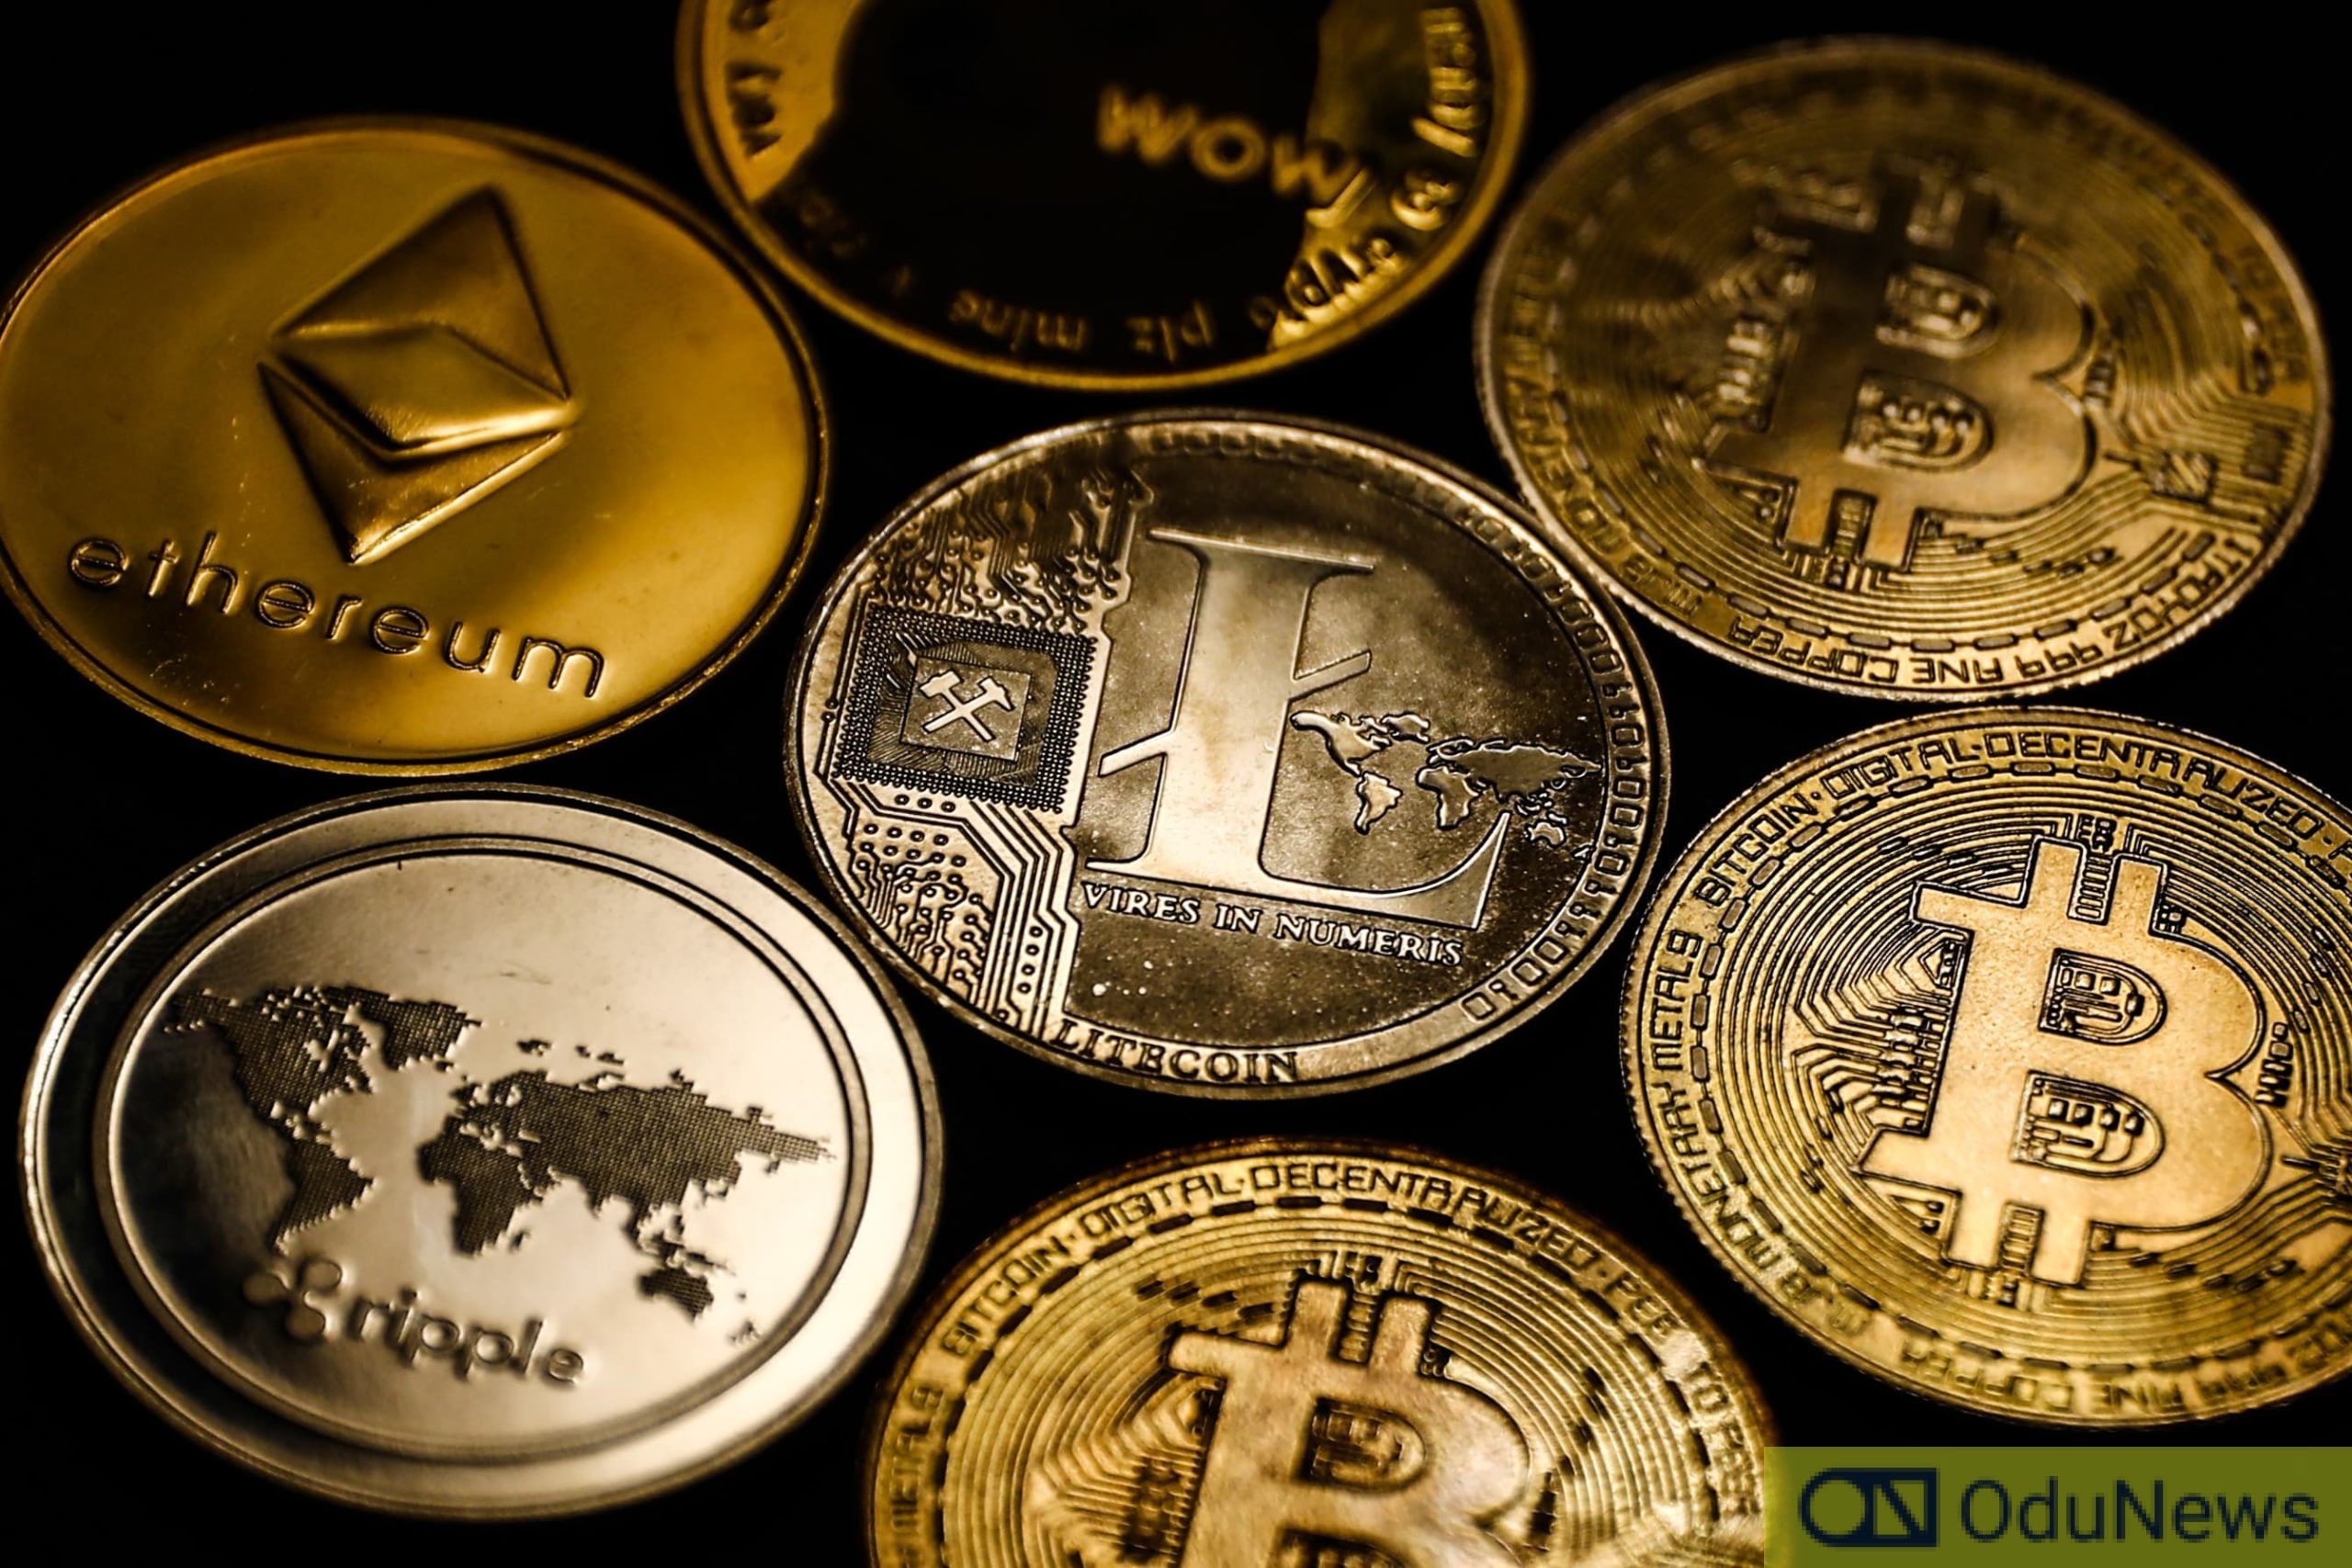 CBN Makes U-turn On Crypto Ban, Plans Regulatory Policy For Usage  